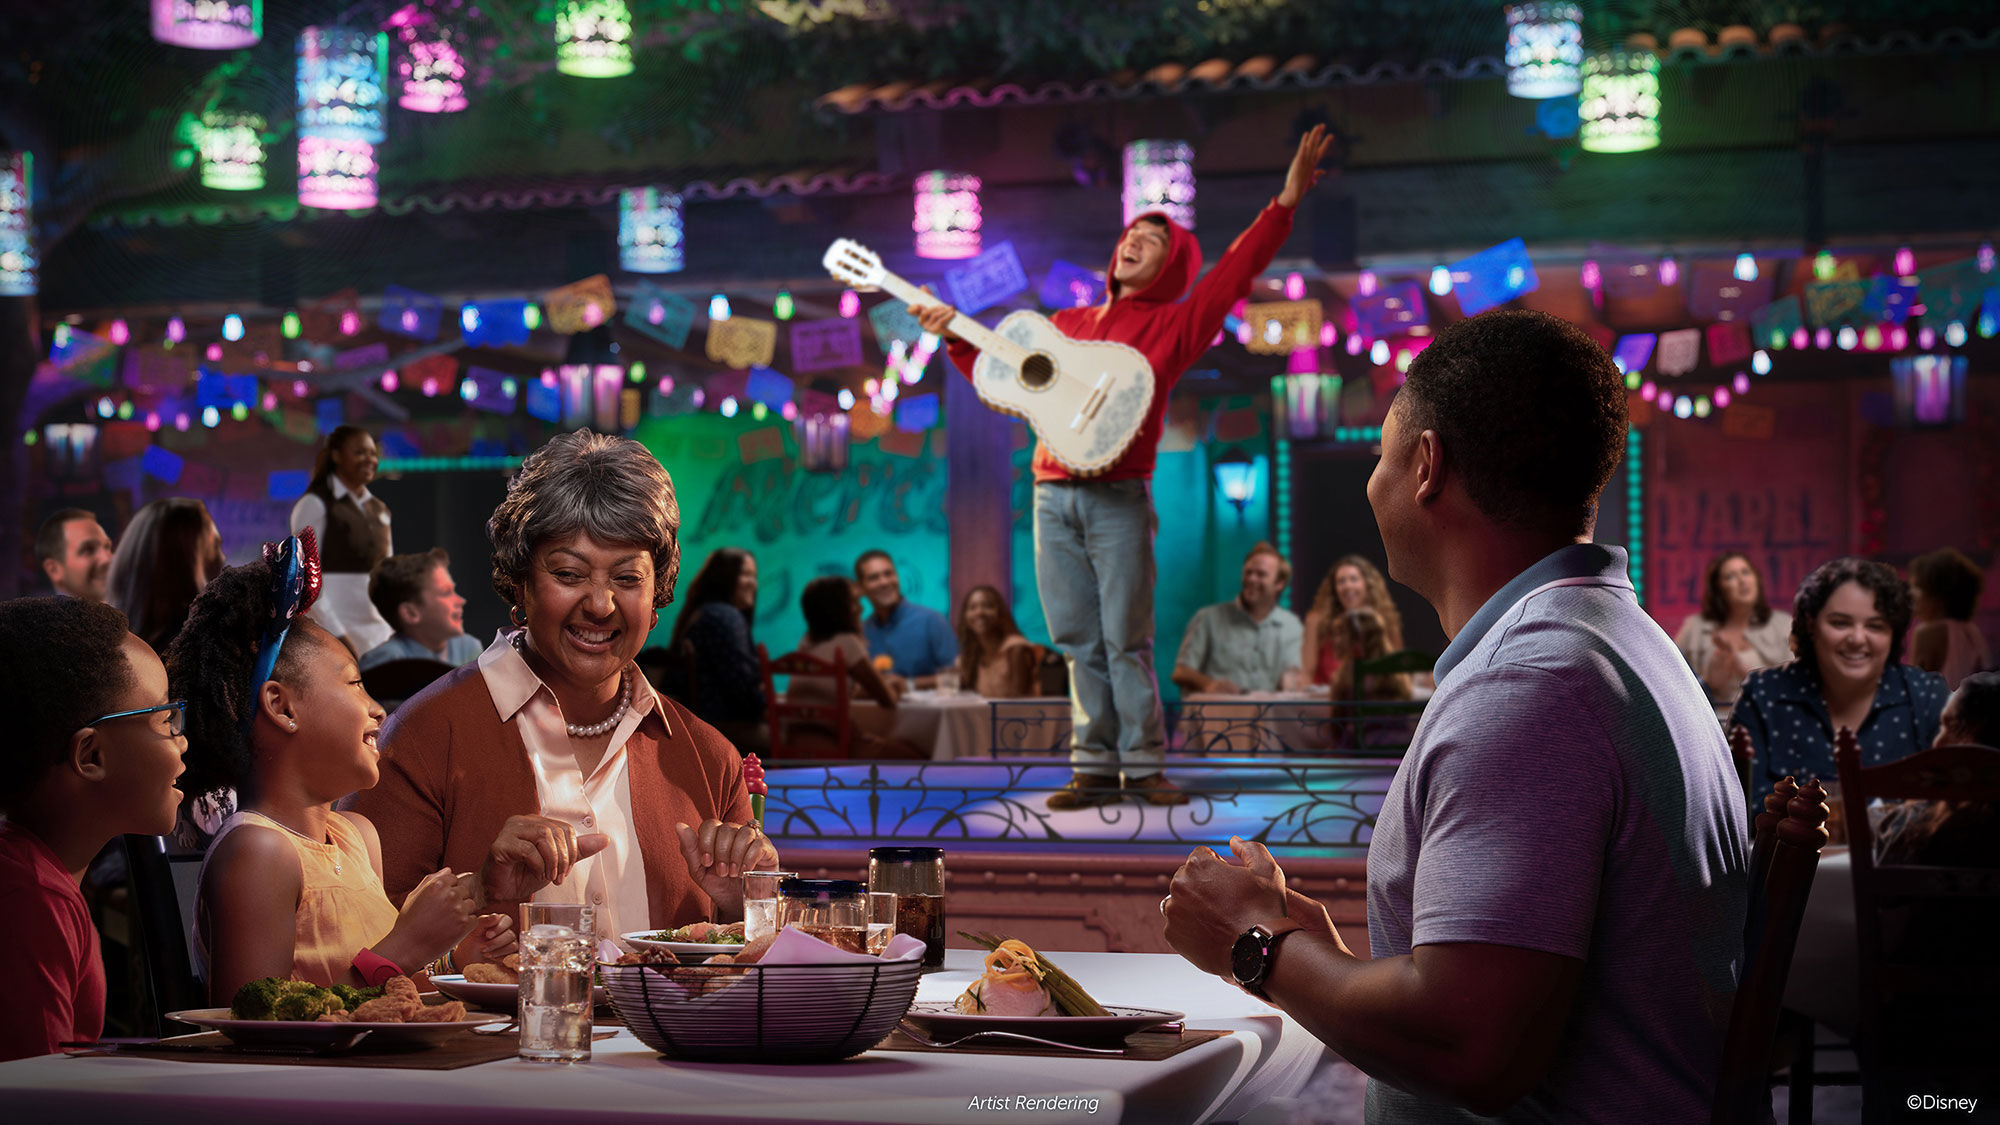 A new bar and restaurant concepts on the Treasure will be Plaza de Coco, a theater-in-the-round dining experience picking up where the film "Coco" left off.